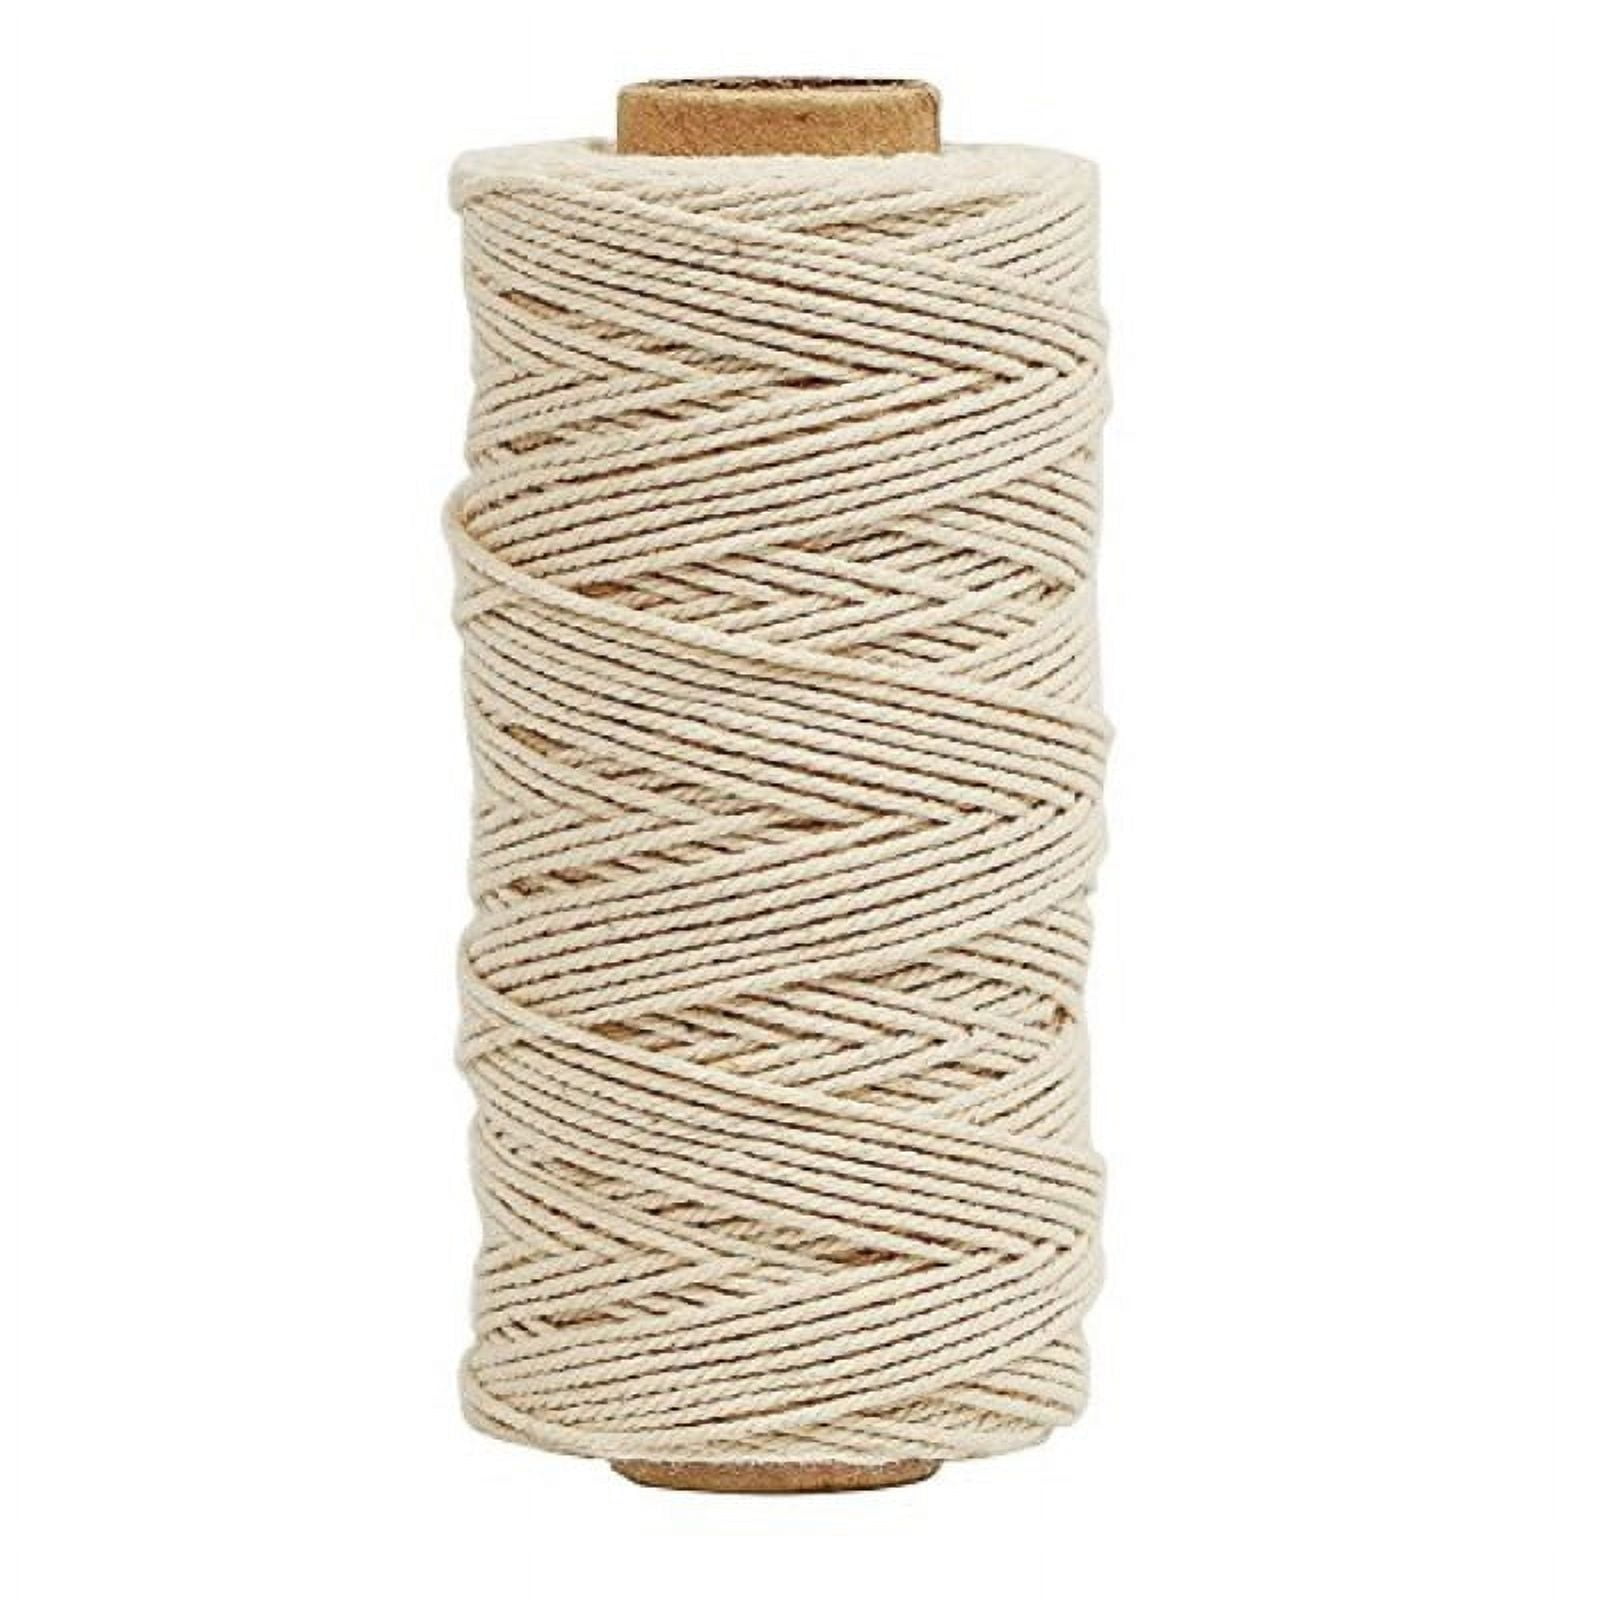 Vivifying 656 Feet 3Ply Cotton Bakers Twine Food Safe Cooking String for Tying Meat Making Sausage